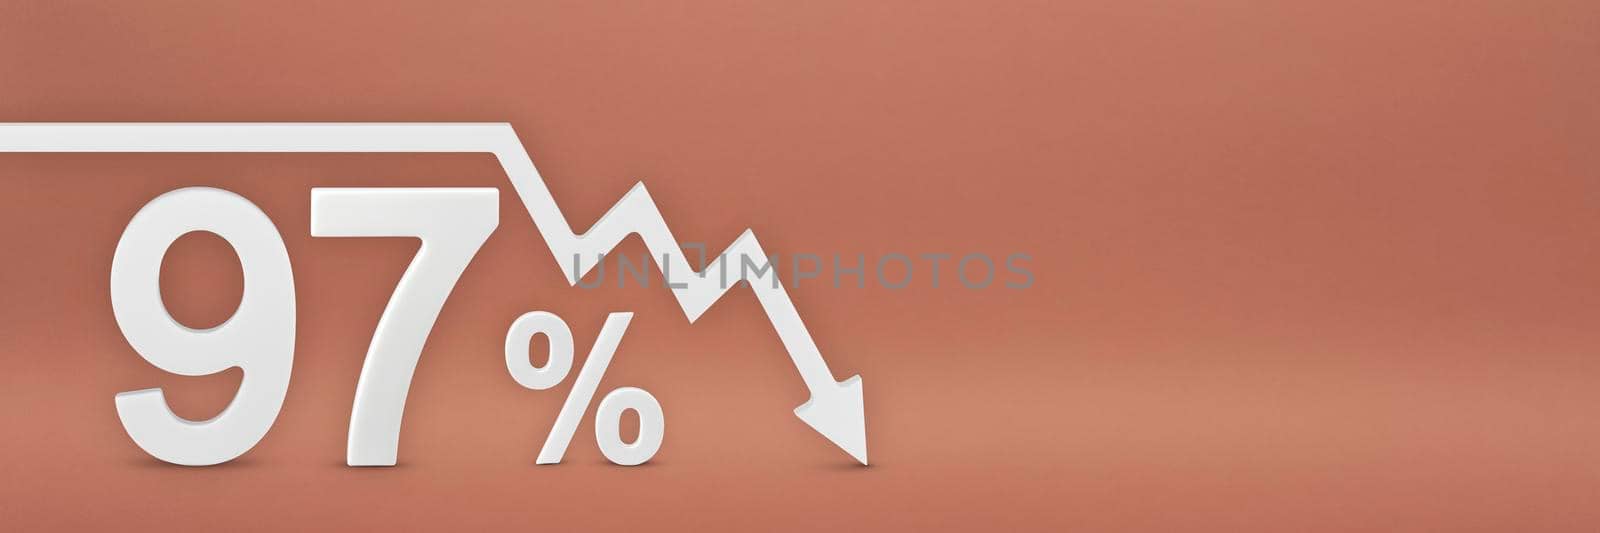 ninety-seven percent, the arrow on the graph is pointing down. Stock market crash, bear market, inflation.Economic collapse, collapse of stocks.3d banner,97 percent discount sign on a red background. by SERSOL